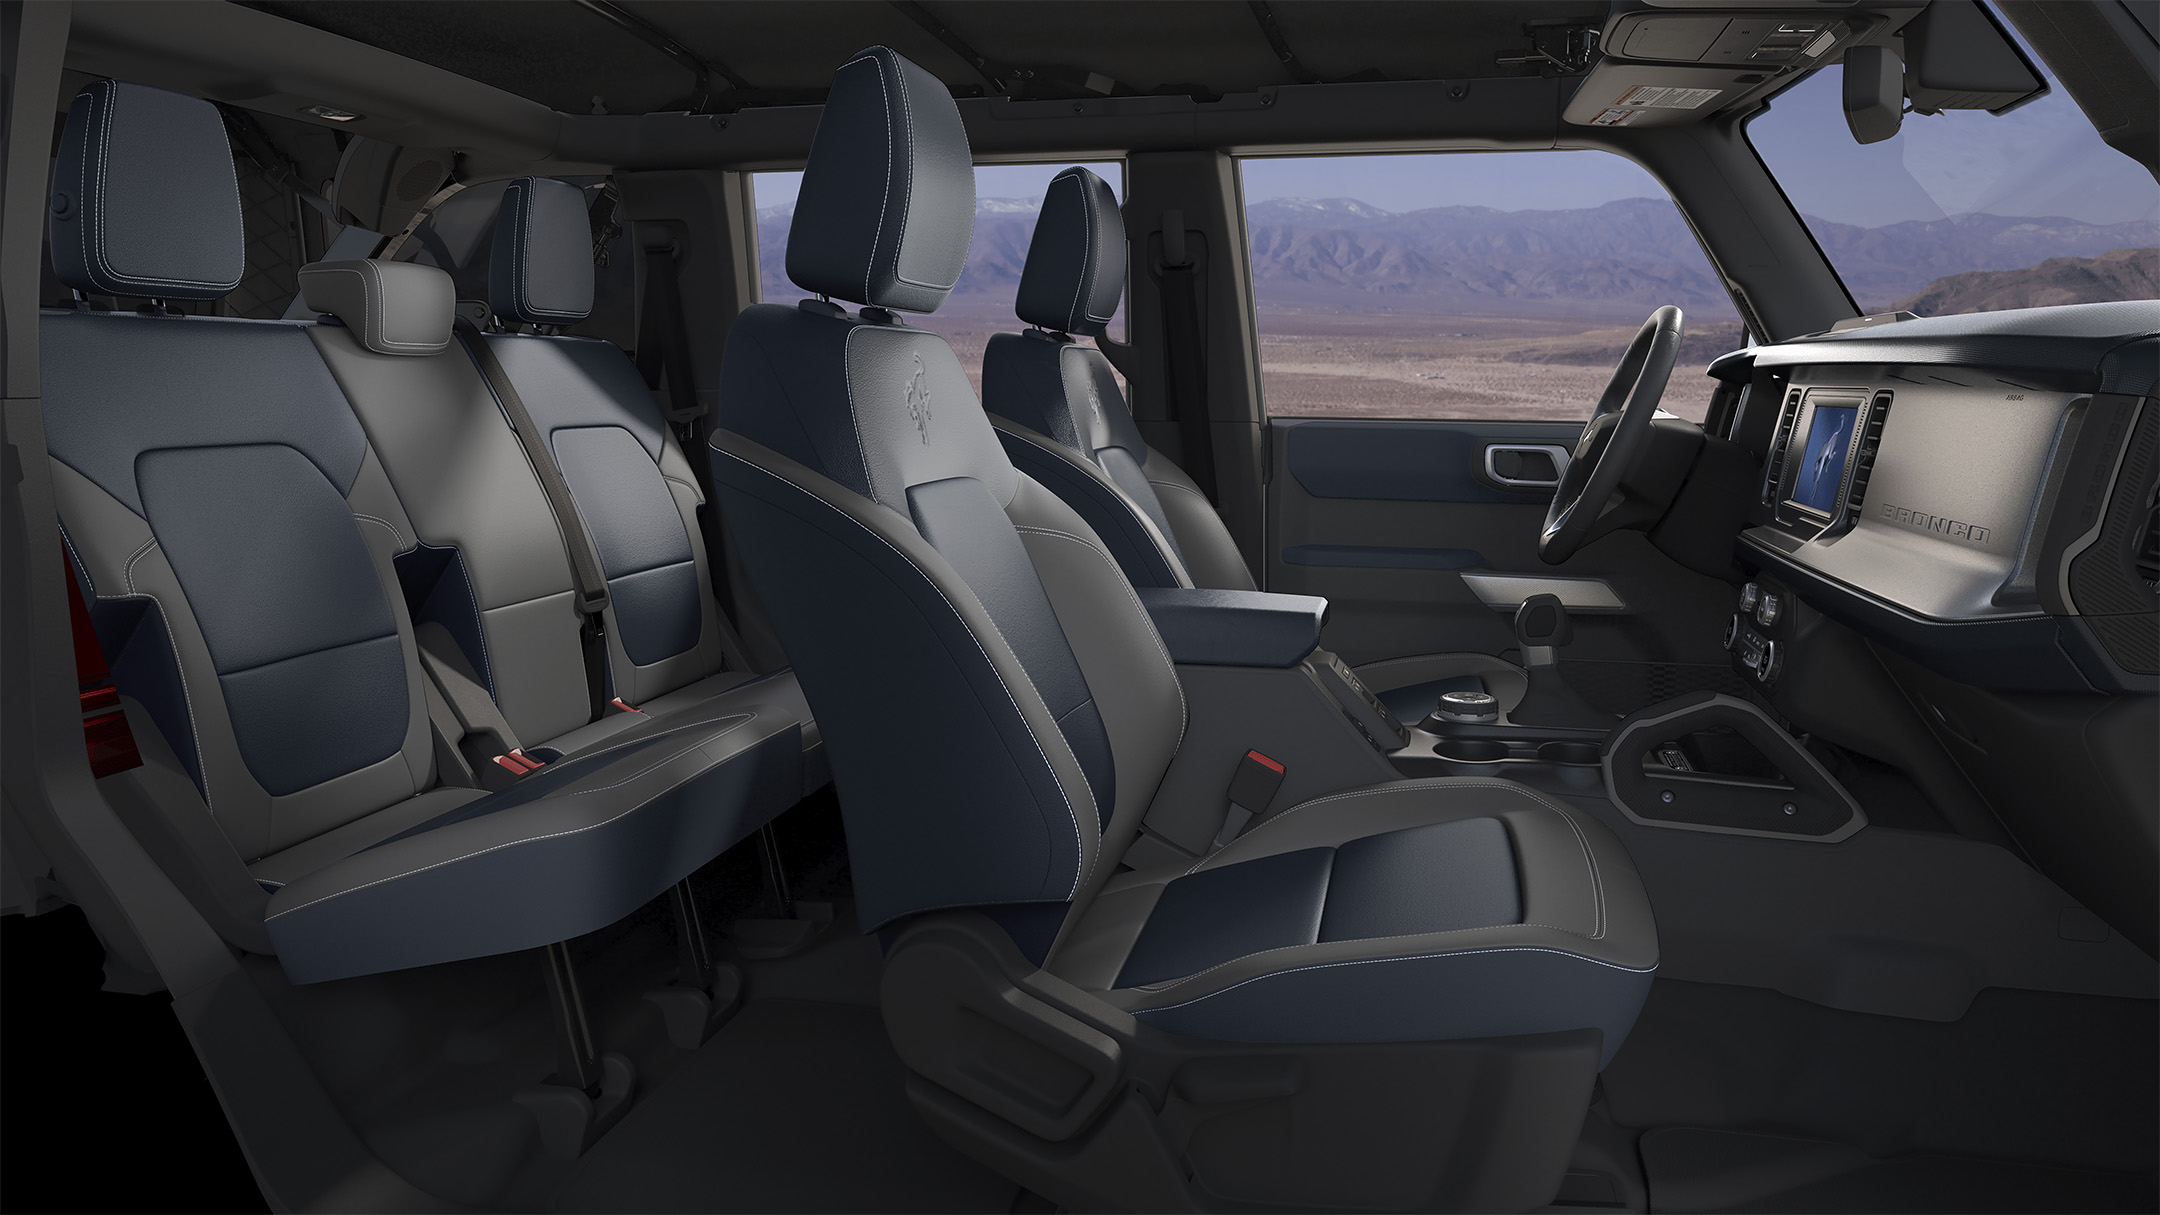 Ford Bronco interior design with the power-adjustable heated leather front seats